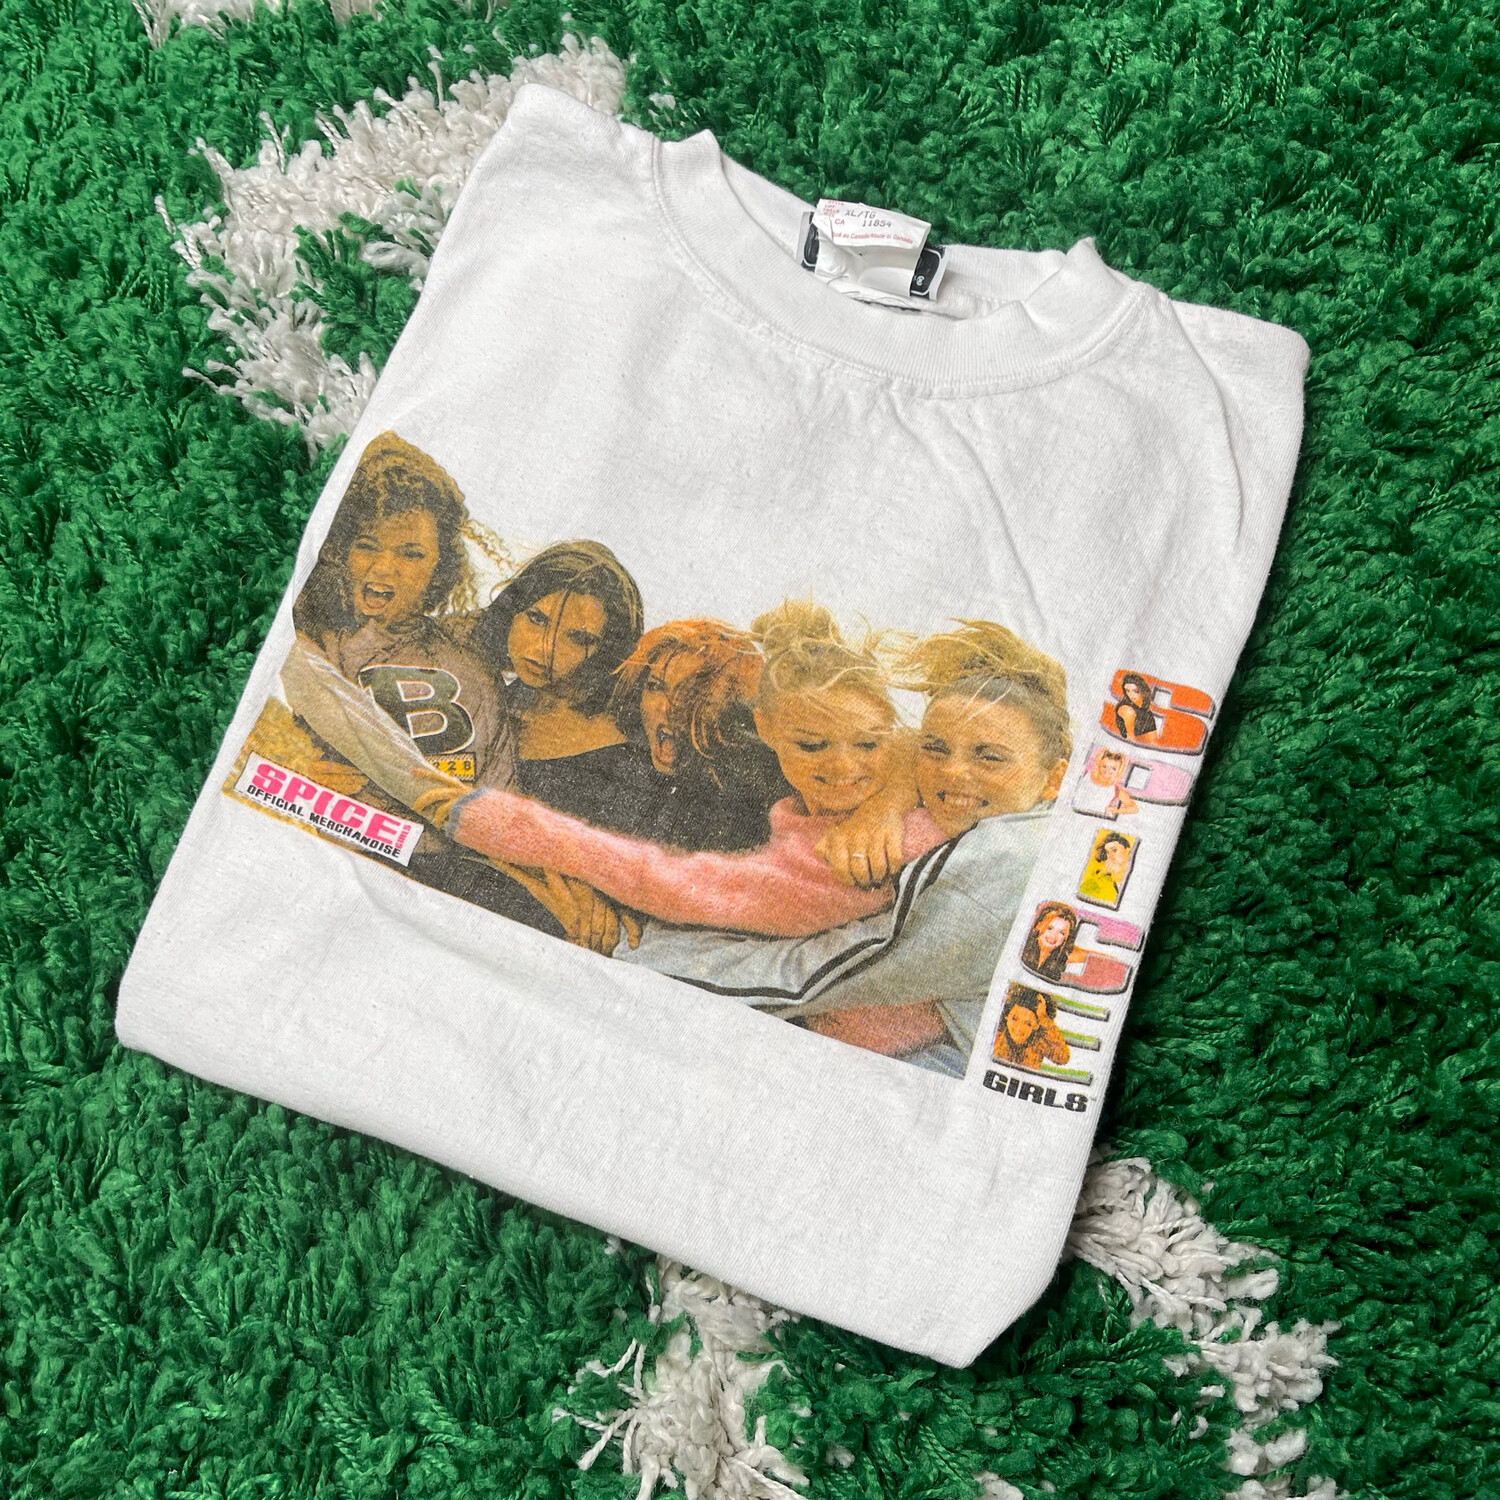 Spice Girls Tee Size Small